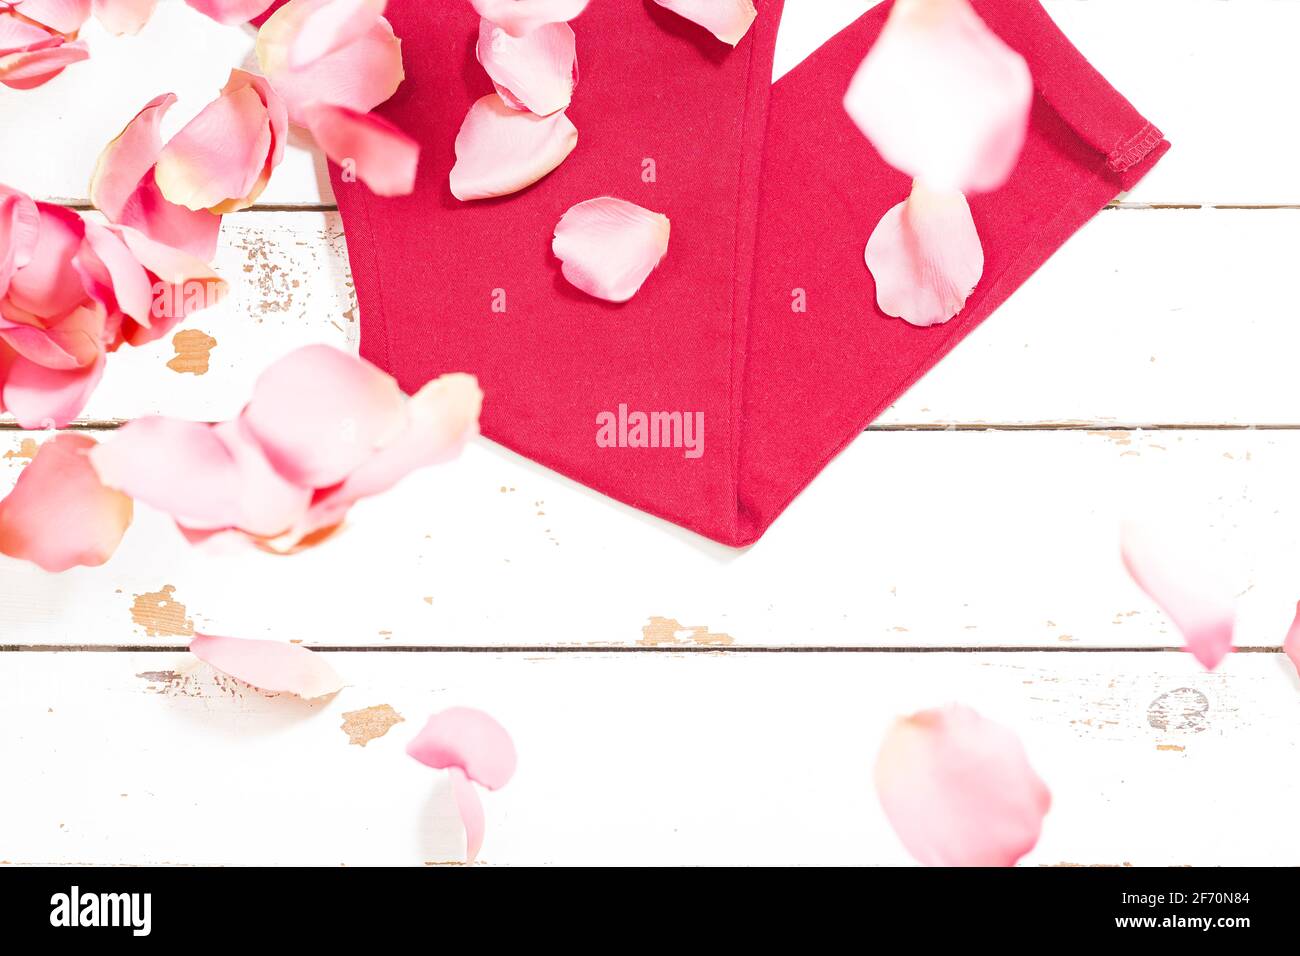 Photograph of clothes of a red pants on white wood and some rose petals. The photograph is an overhead shot with a horizontal format. Stock Photo